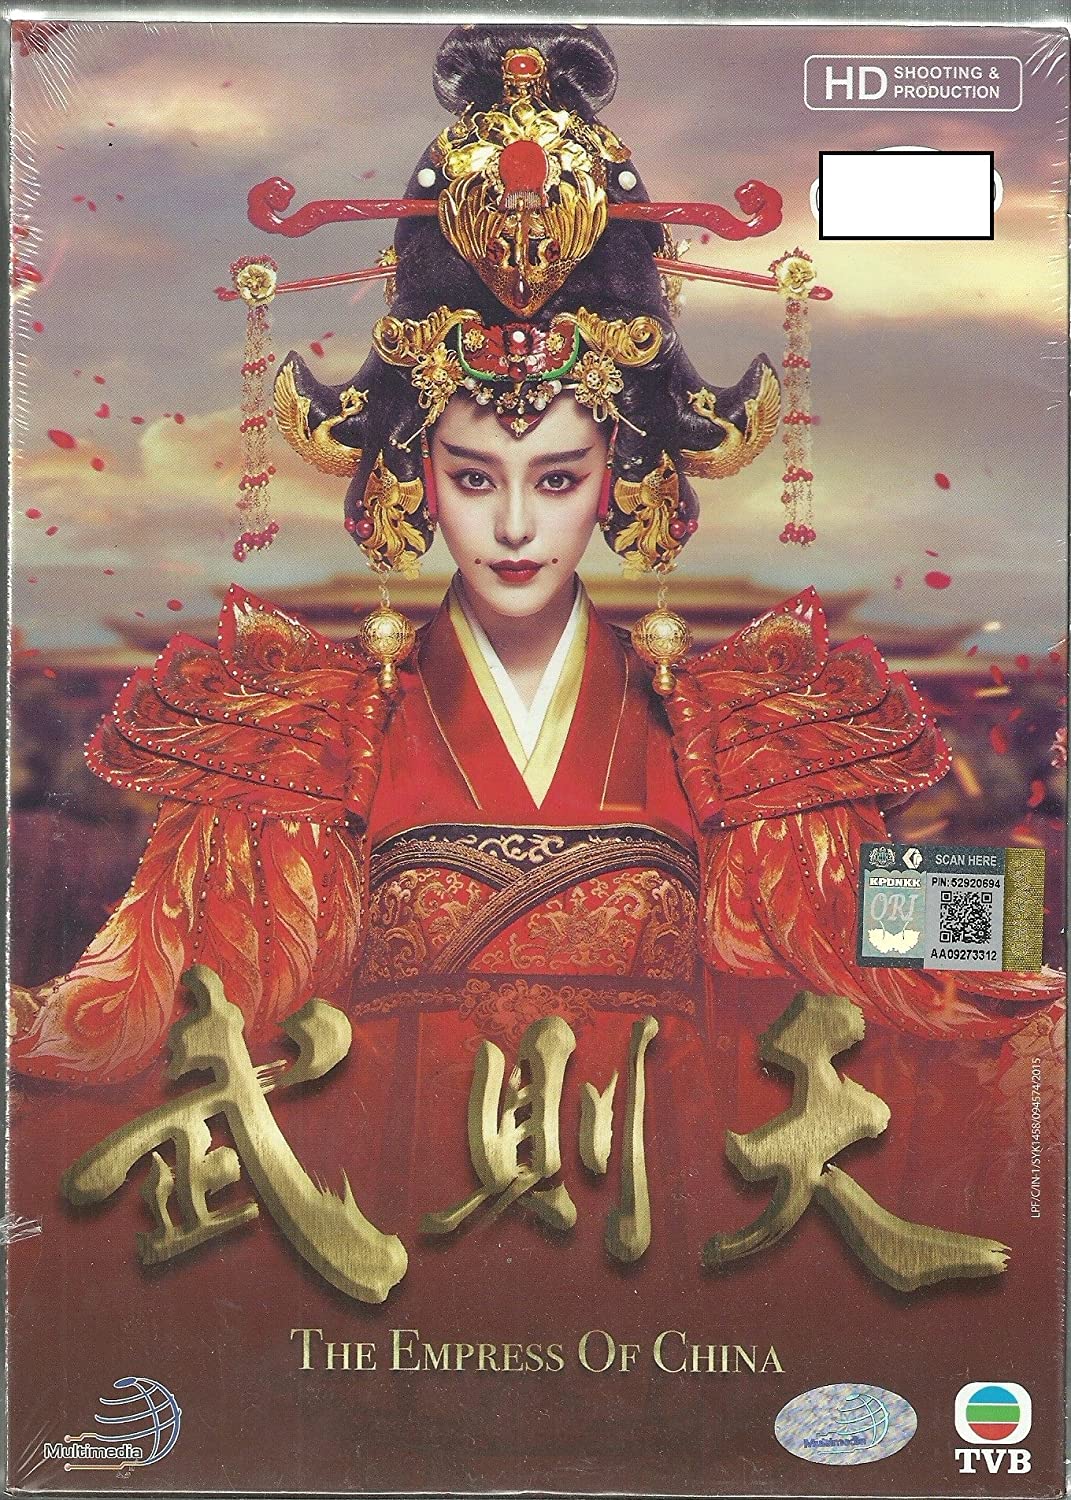 THE EMPRESS OF CHINA / WU ZE TIAN CHINESE TV SERIES 1 75 EPISODES DVD BOX SETS: Amazon.ca: DVD